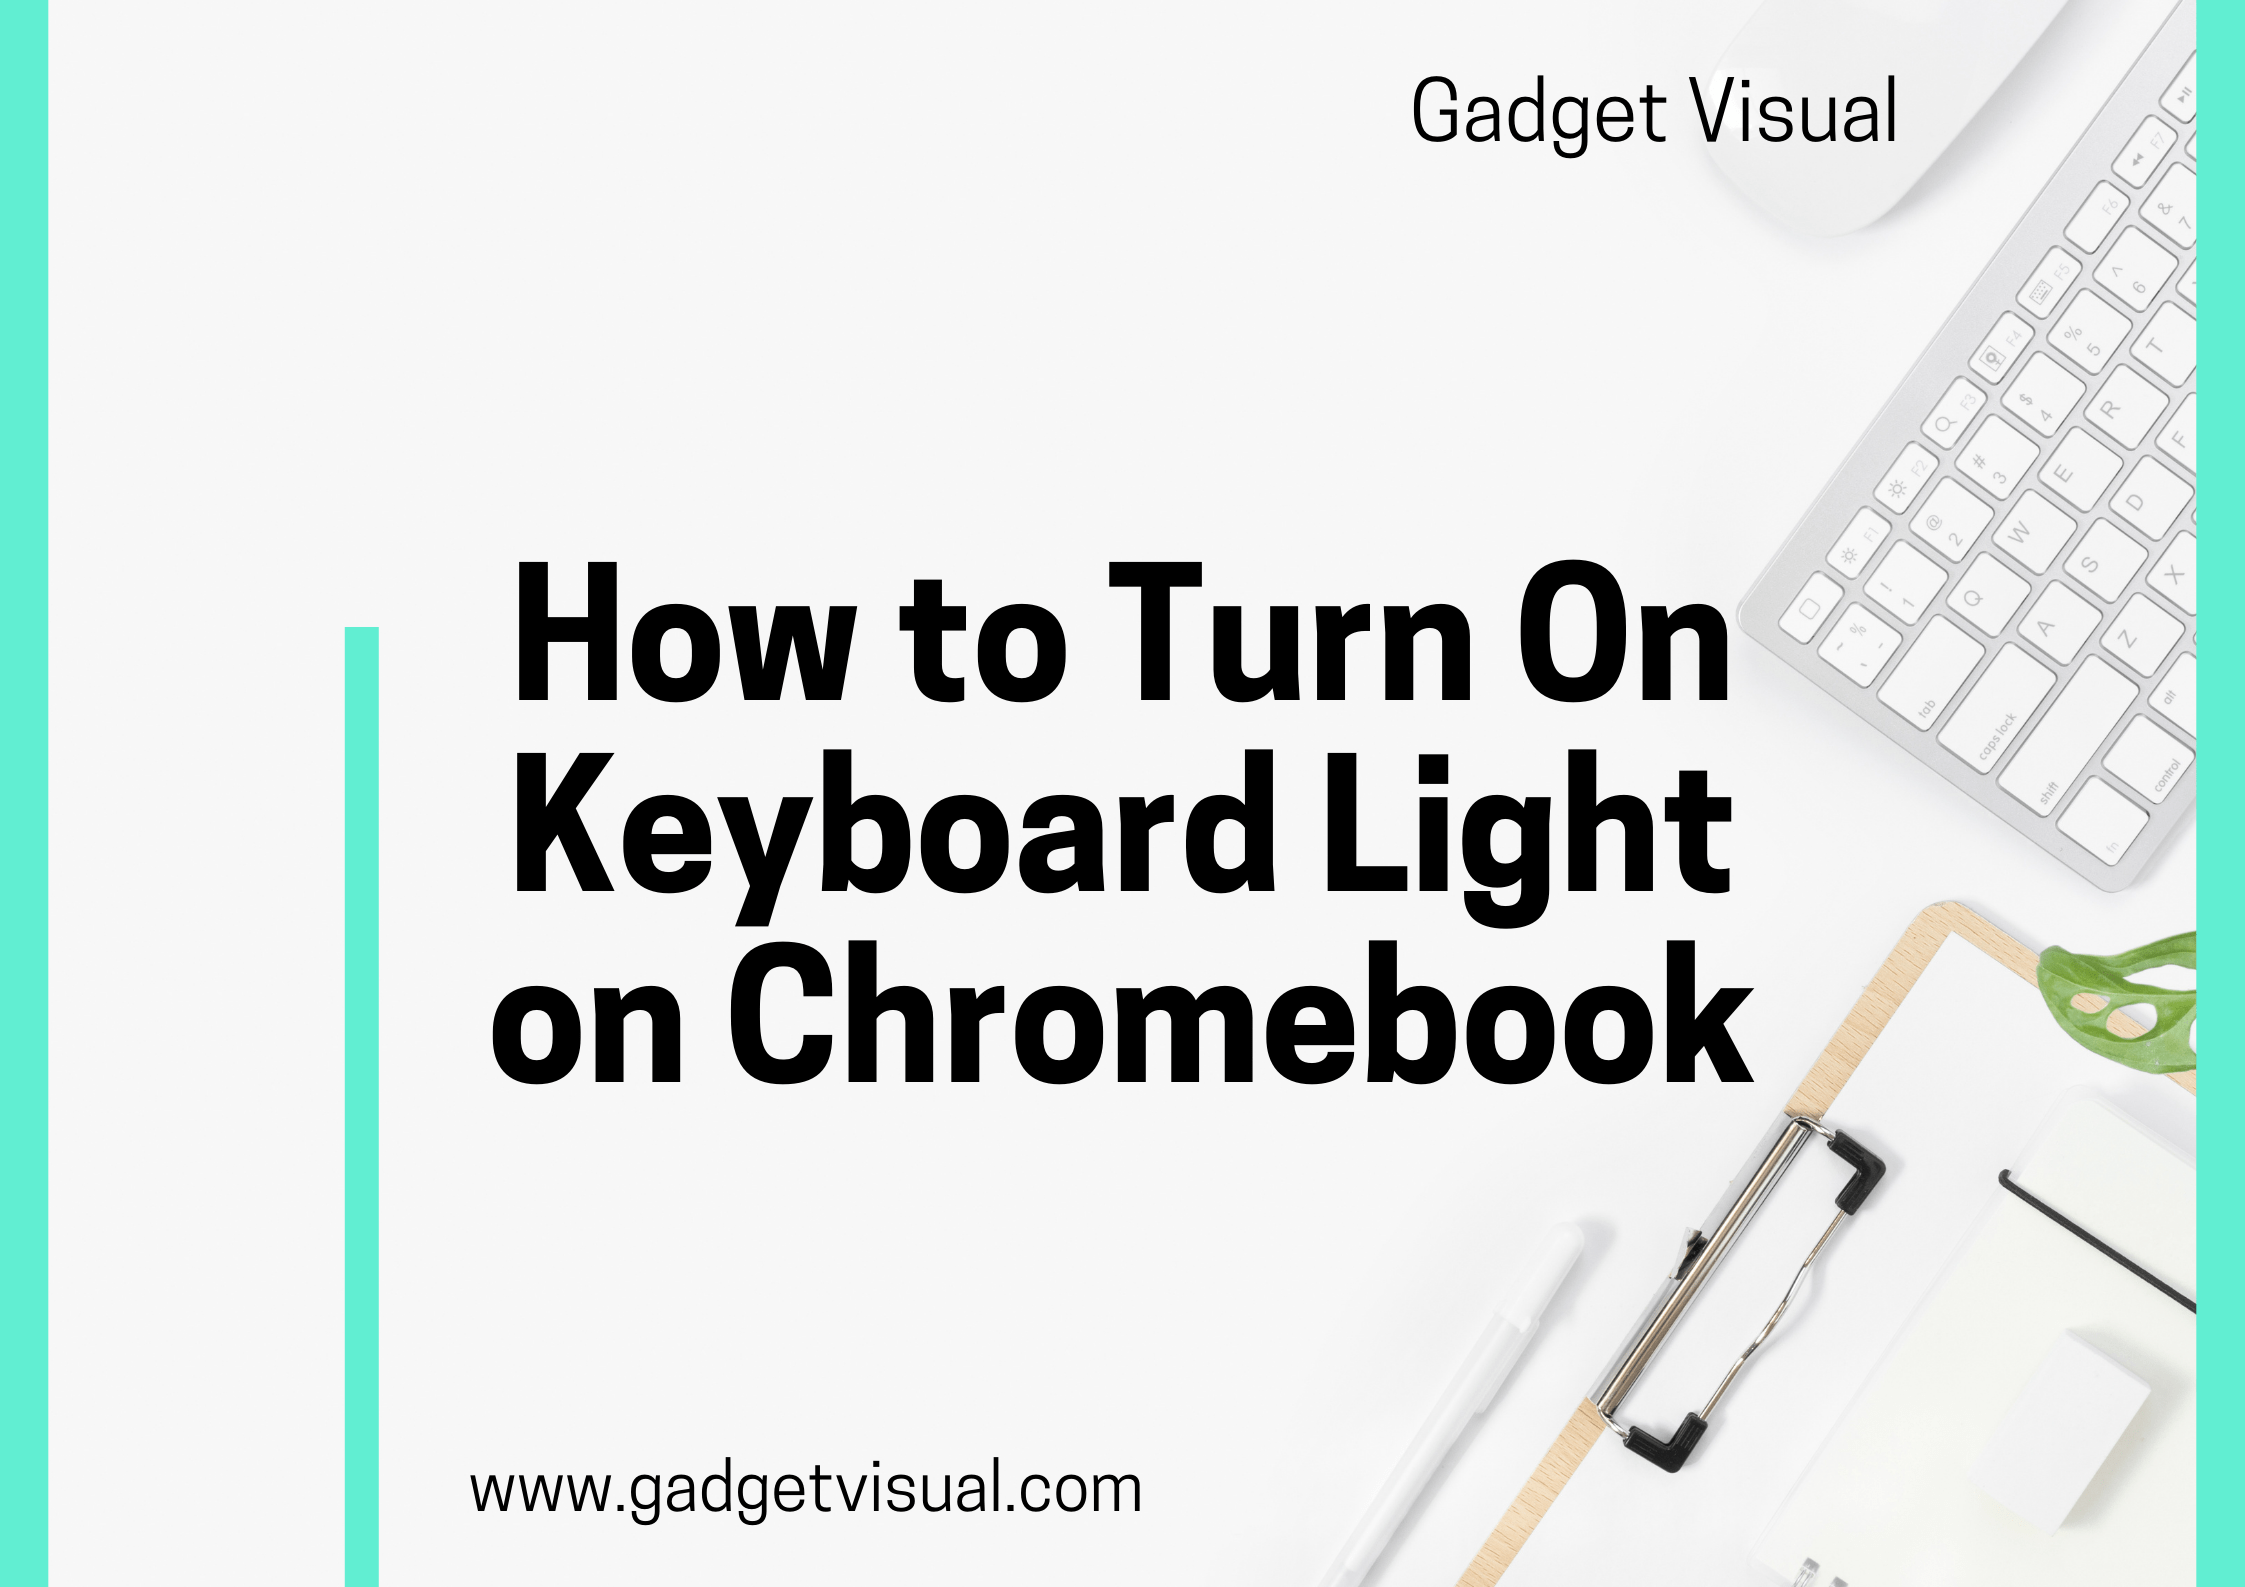 How to Turn On Keyboard Light on Chromebook